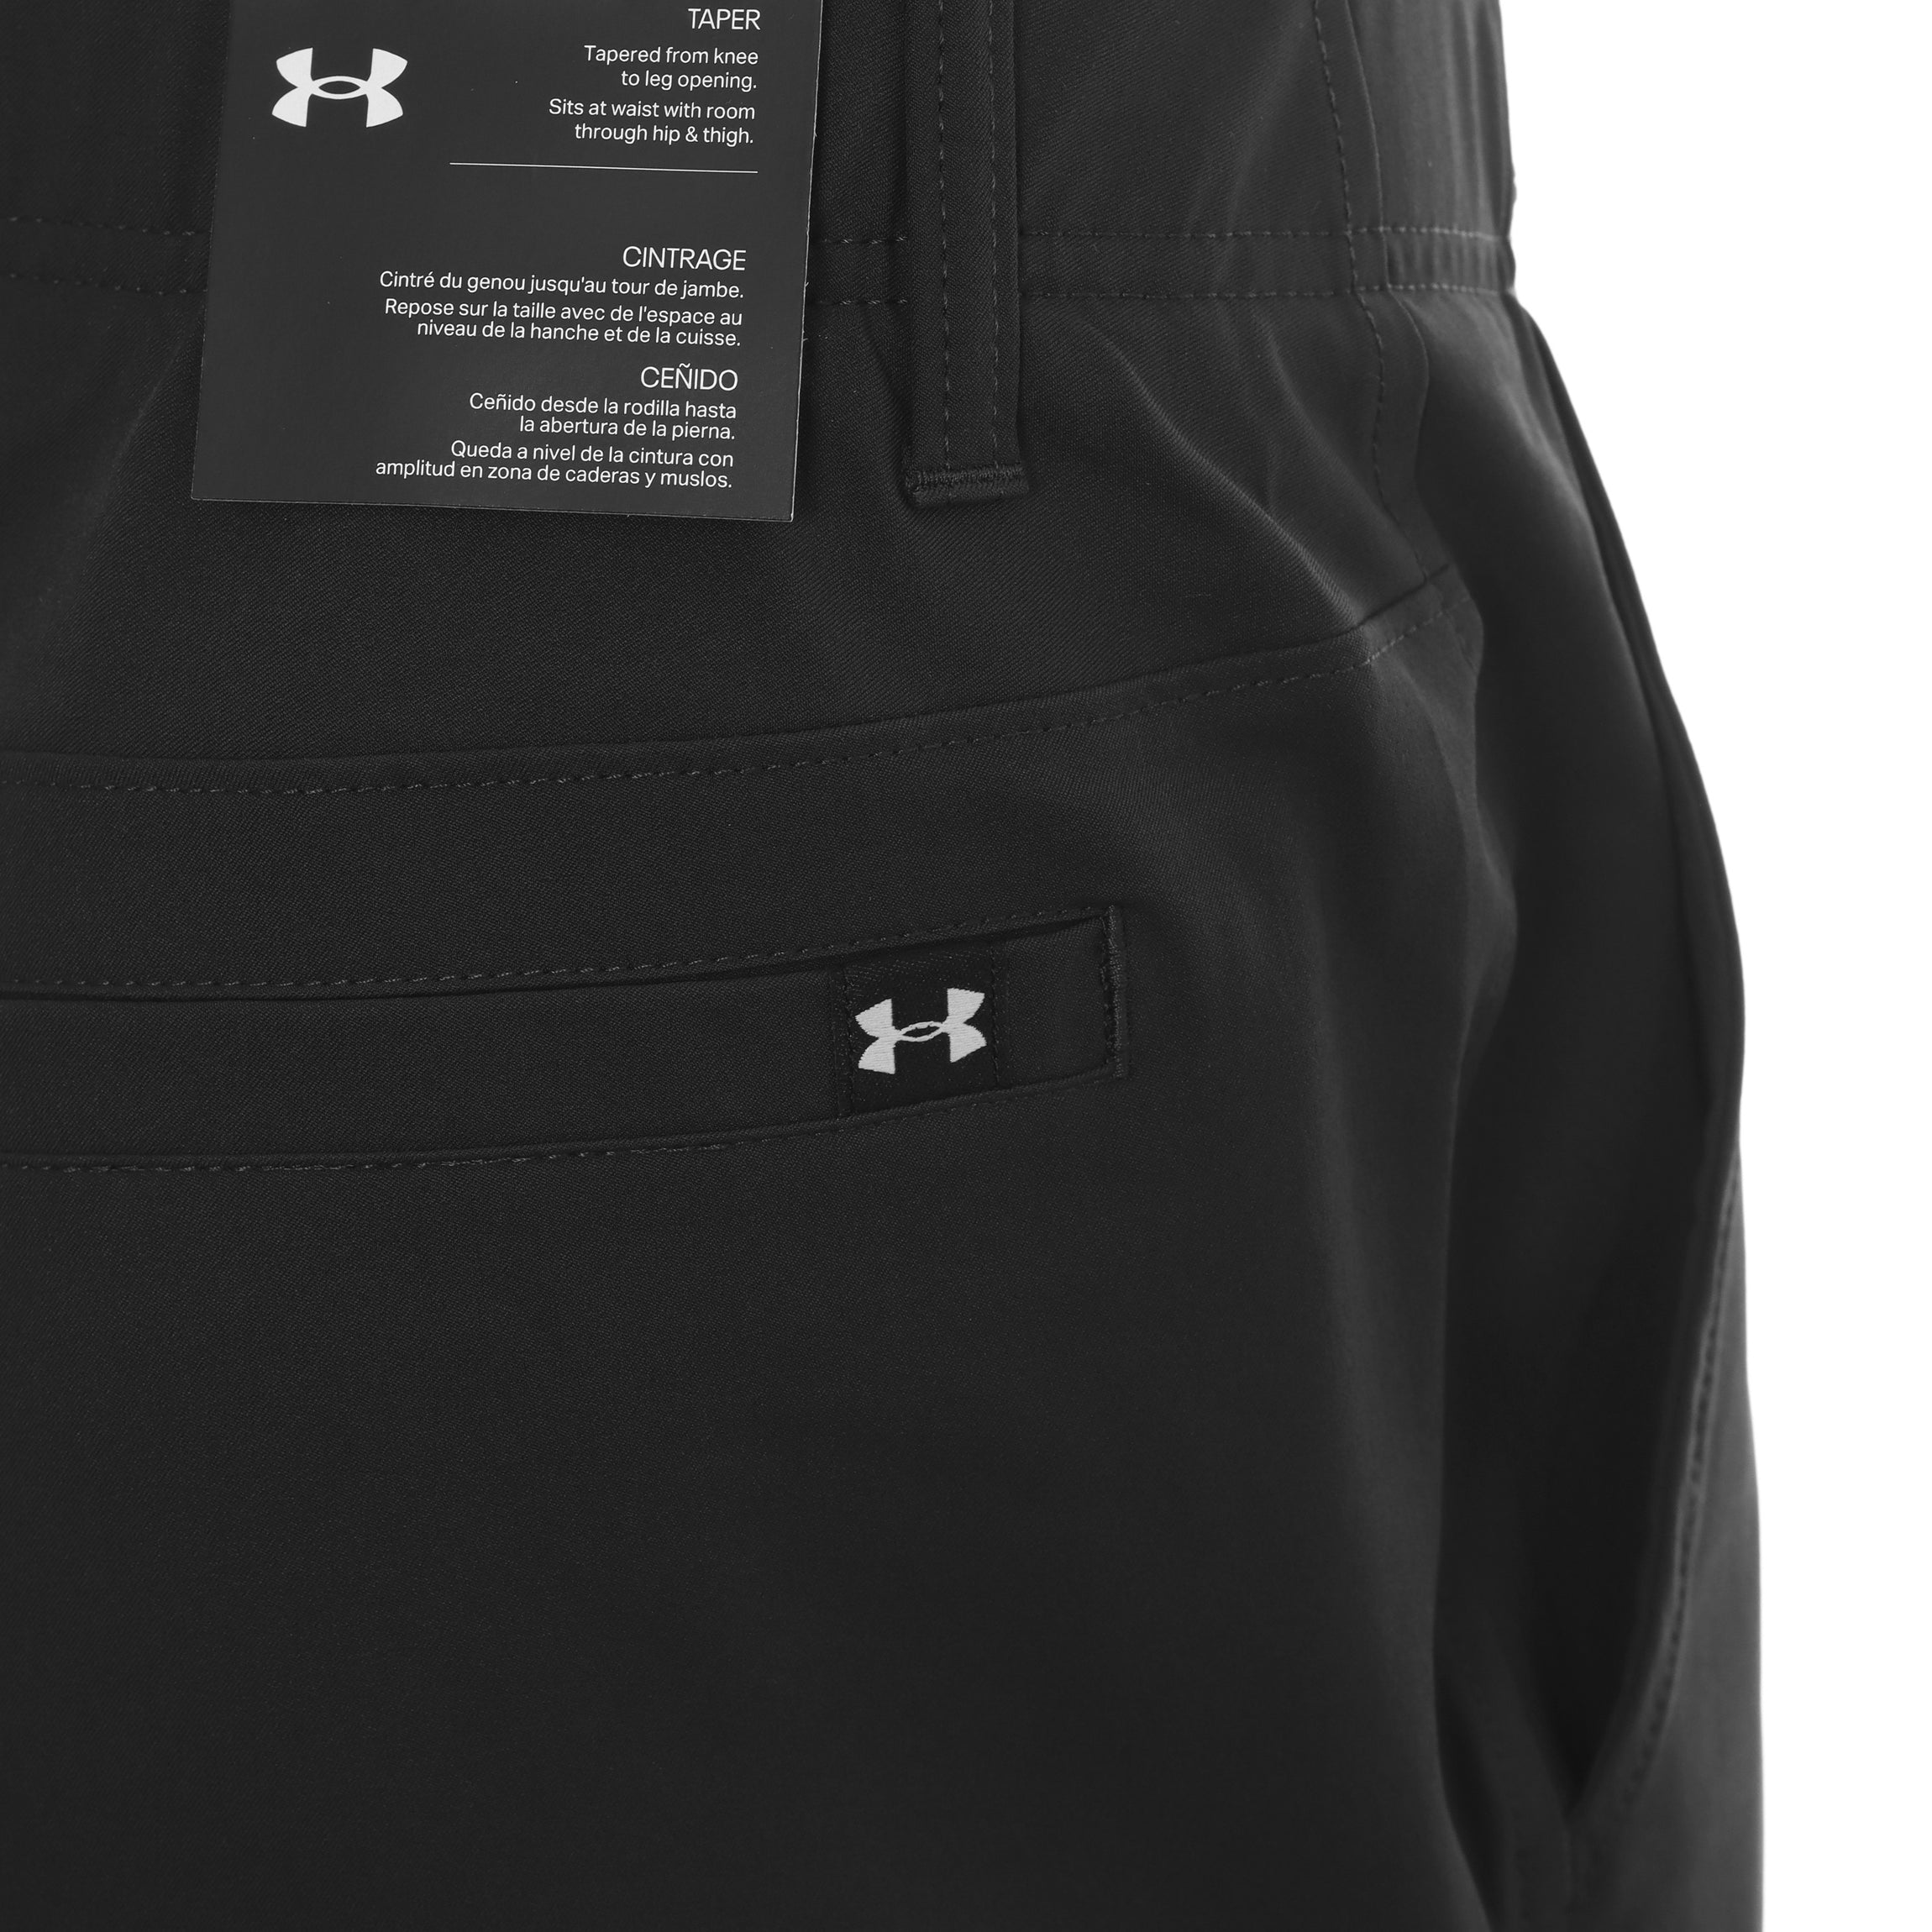 Under Armour Golf Pants, Drive Taper, Mens - Time-Out Sports